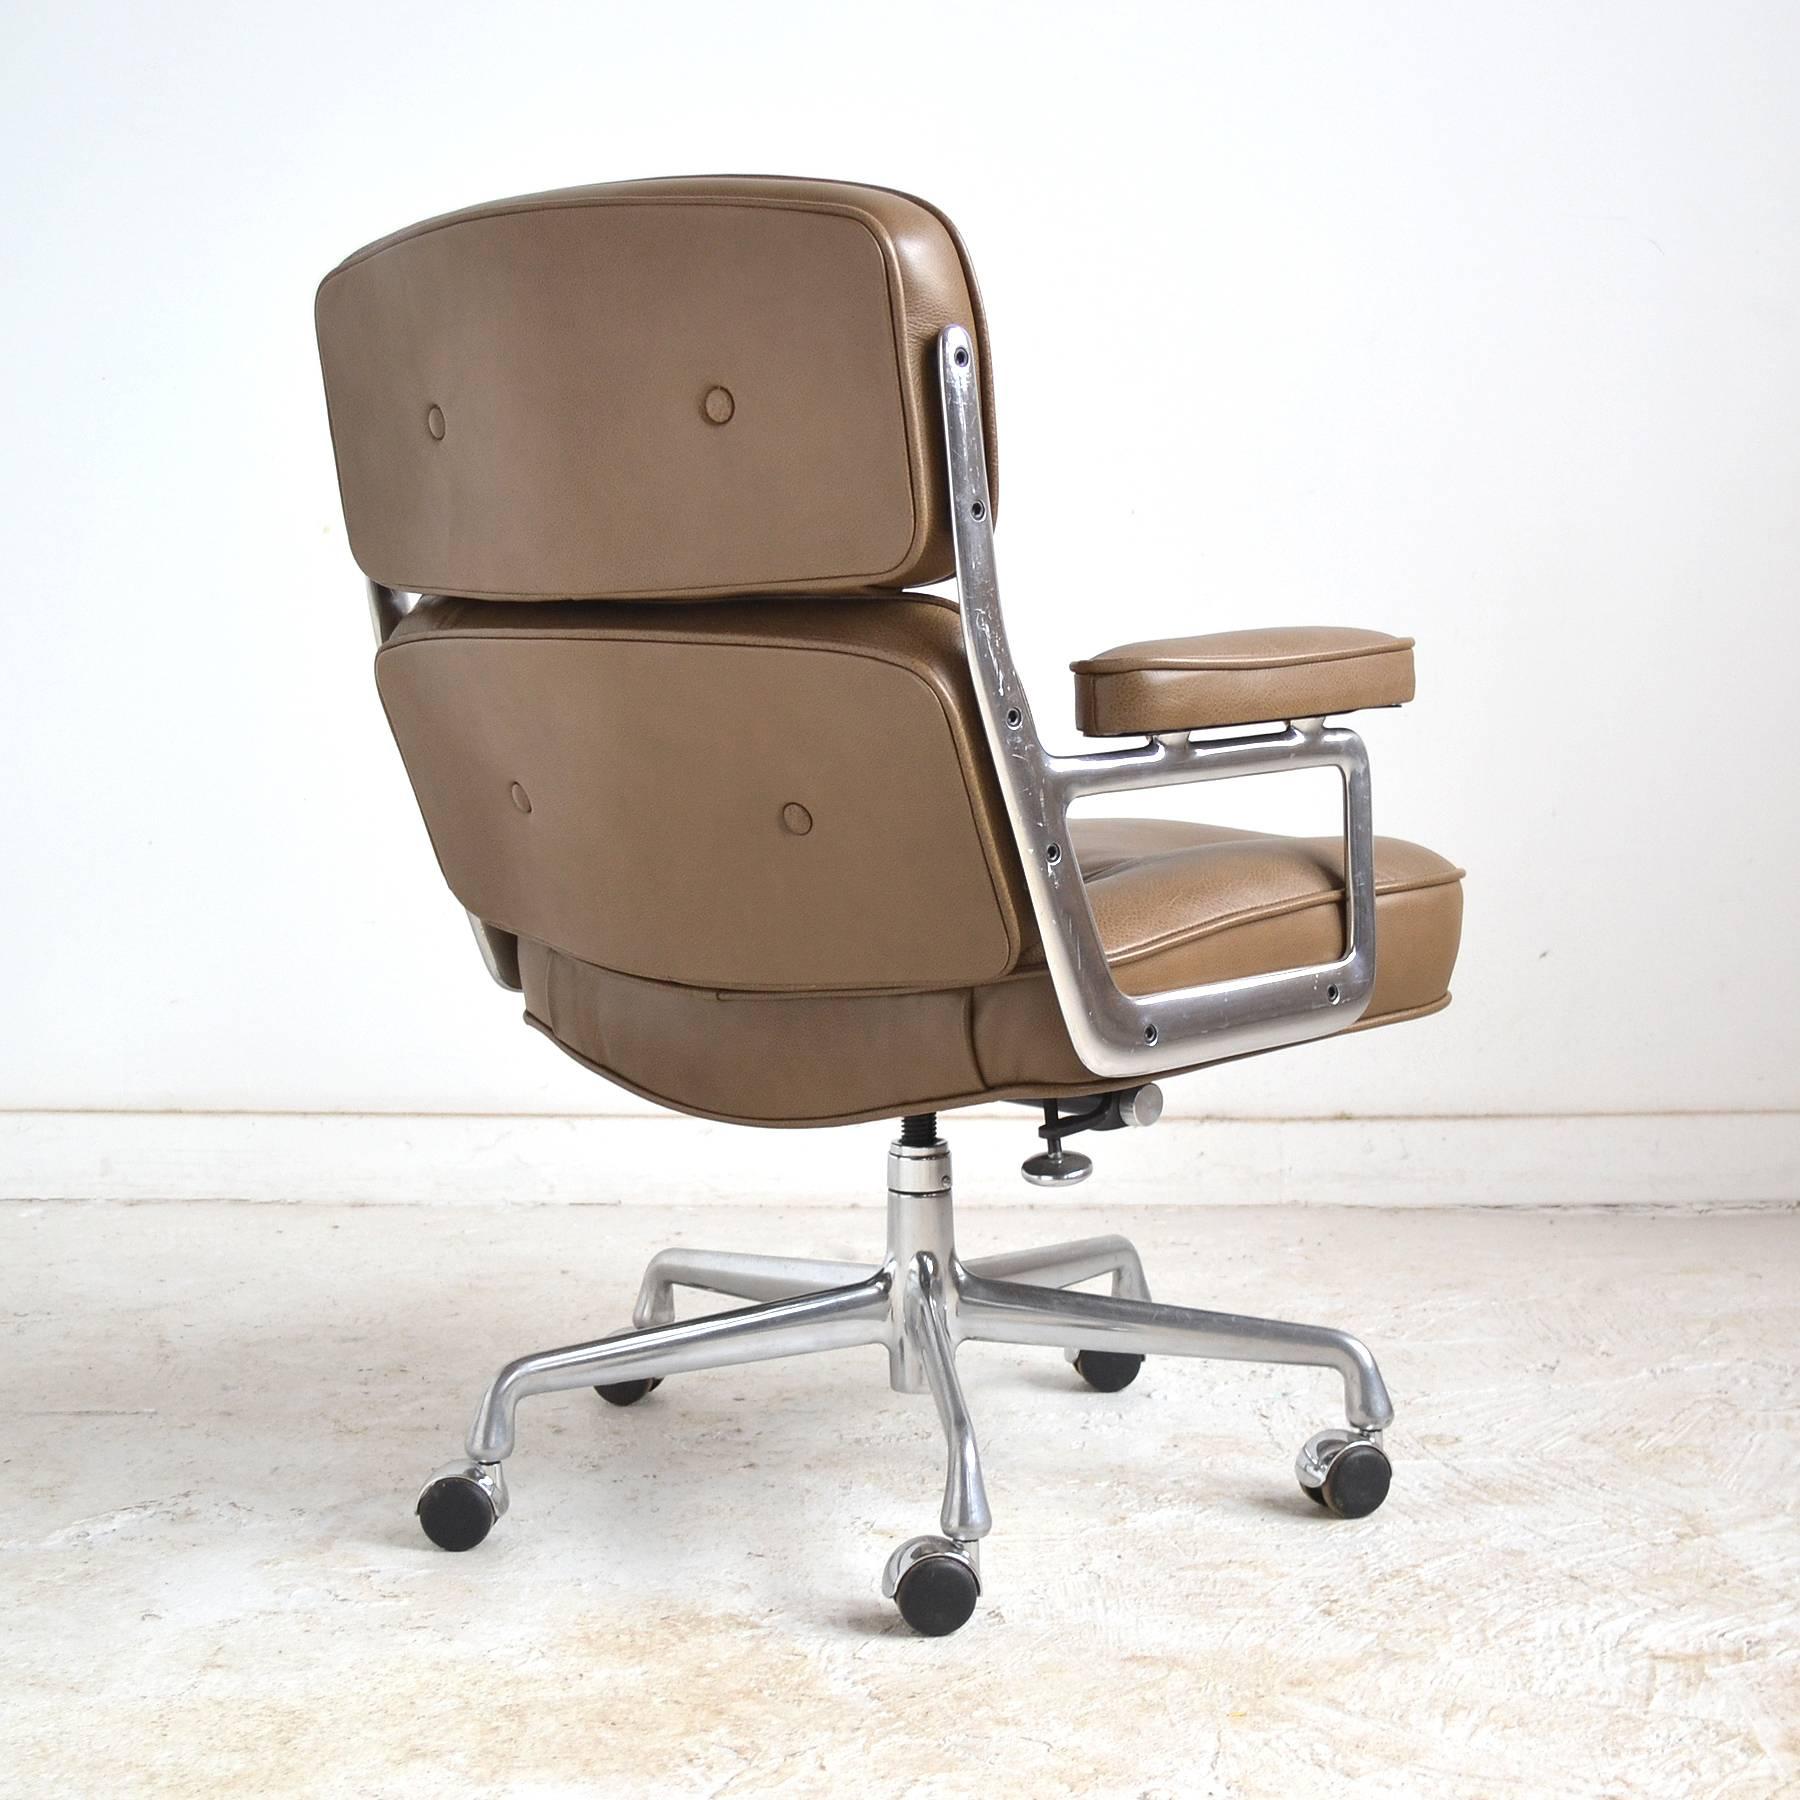 Aluminum Charles and Ray Eames Time-Life Chair by Herman Miller